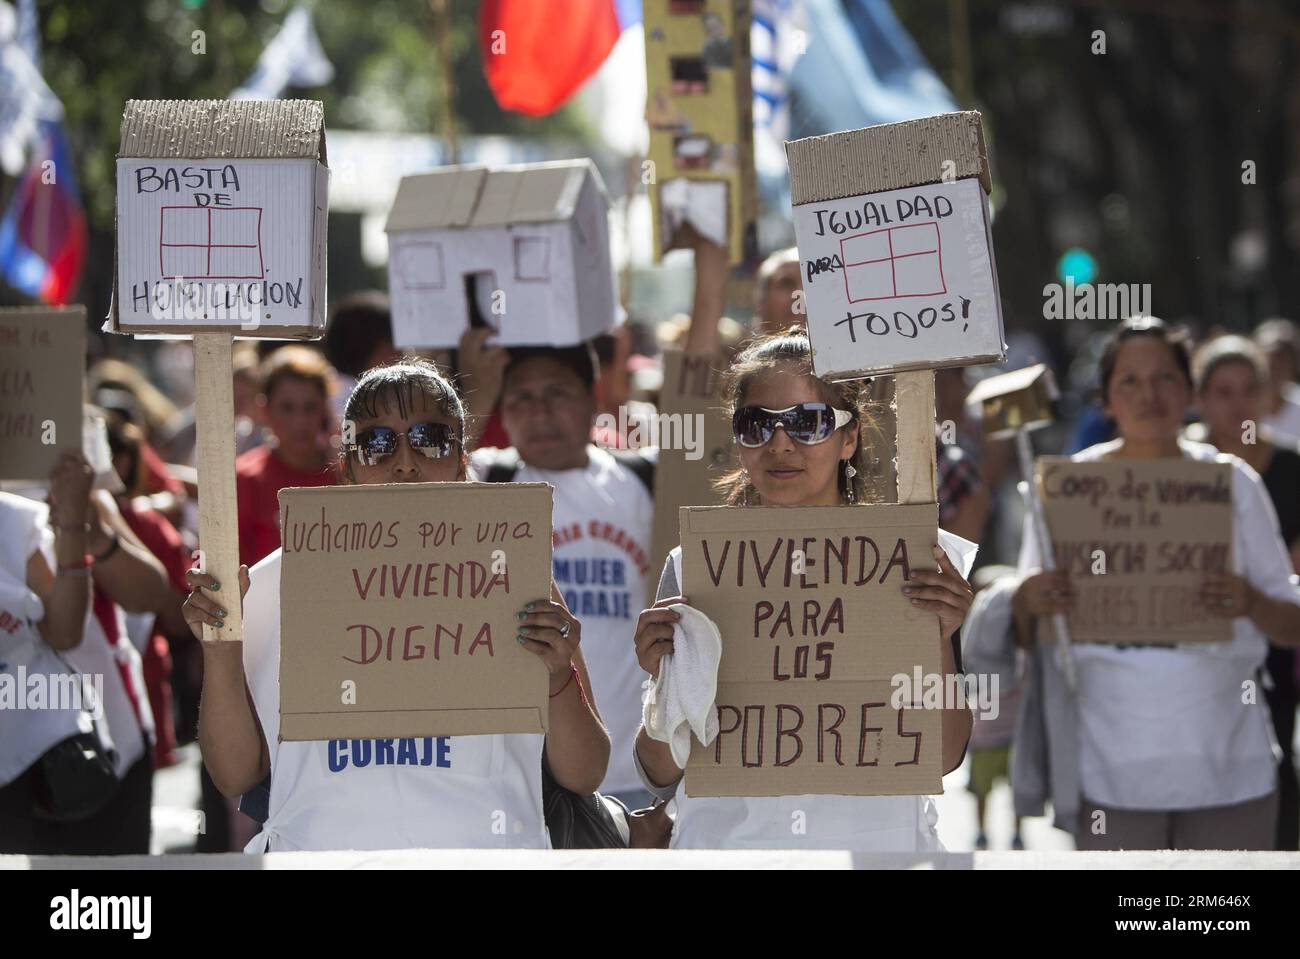 Bildnummer: 60794933  Datum: 04.12.2013  Copyright: imago/Xinhua     BUENOS AIRES, Dec. 4, 2013 (Xinhua) -- Residents from several informal settlements protest against the lack of housing programs, in Buenos Aires, capital of Argentina, on Dec. 4, 2013. (Xinhua/Martin Zabala) ARGENTINA-BUENOS AIRES-PROTEST PUBLICATIONxNOTxINxCHN Gesellschaft Demo Protest Politik premiumd x0x xac 2013 quer Stock Photo